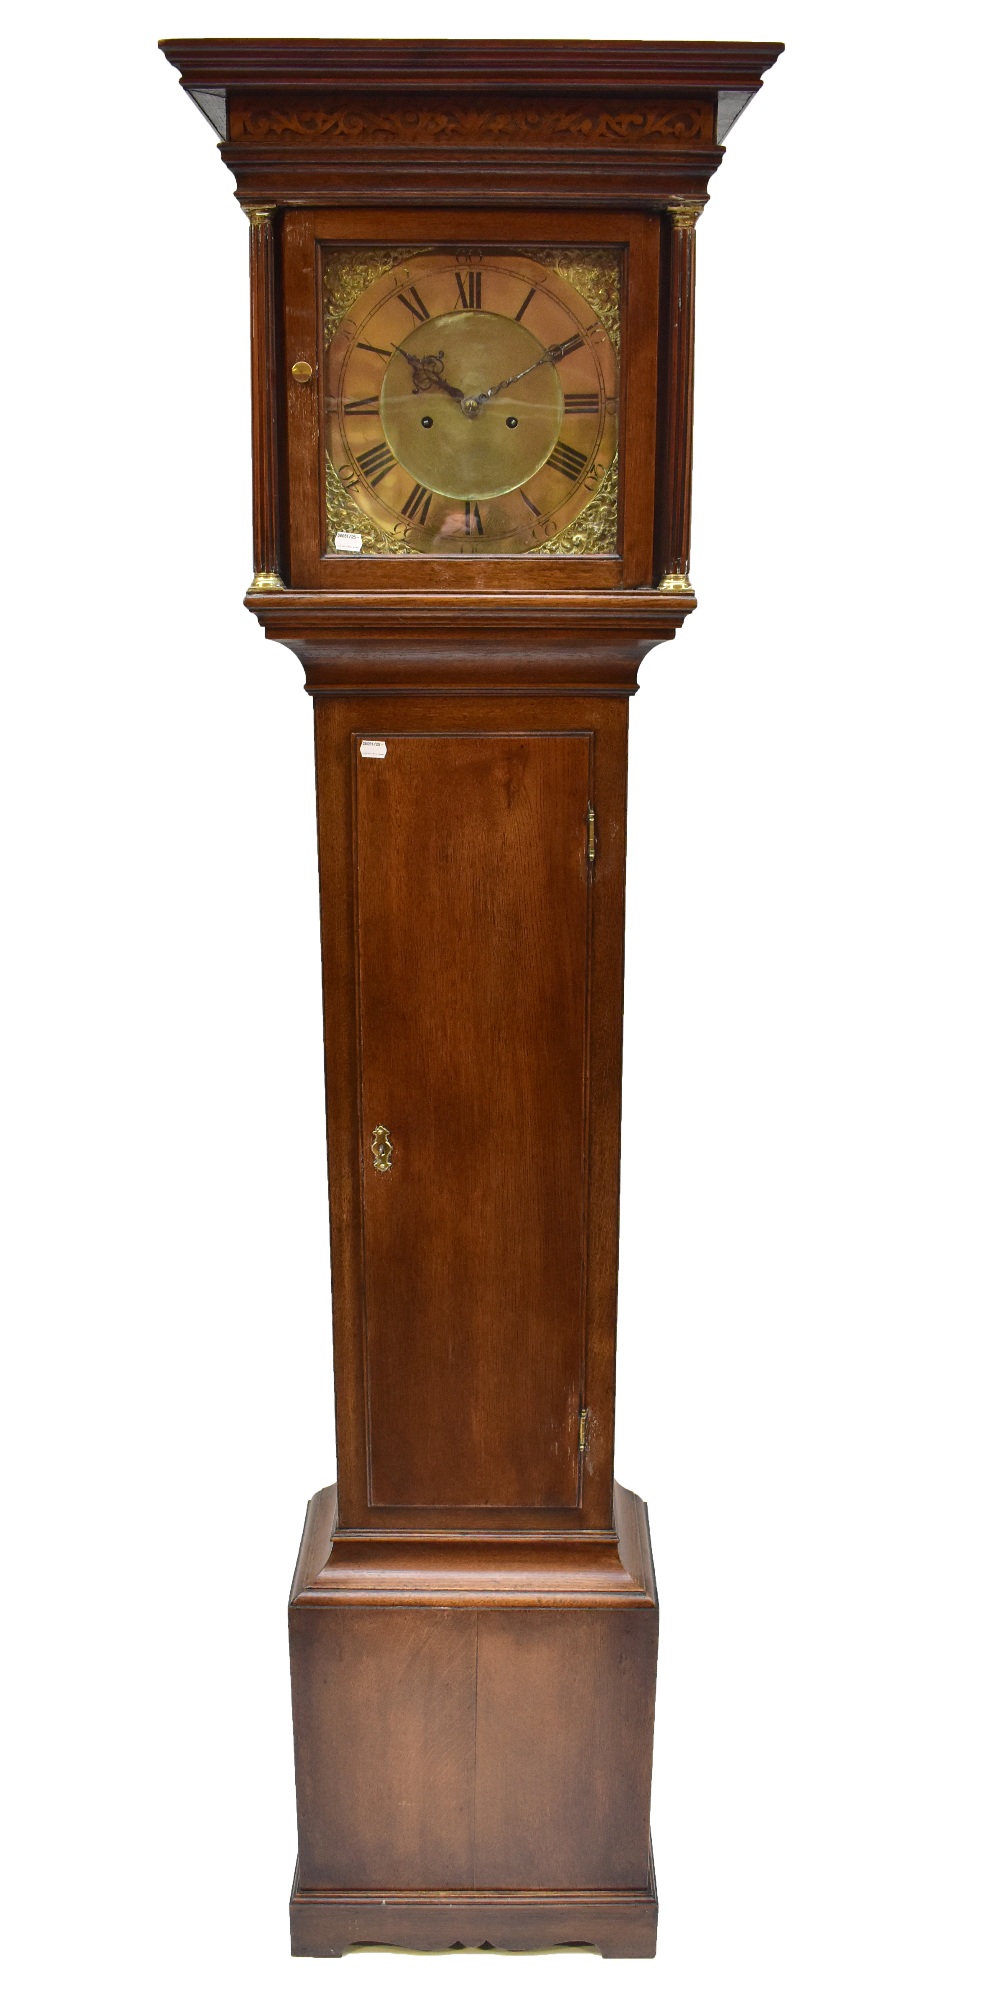 JOHN PURDEN OF MAIDENHEAD; an oak cased longcase clock, the hood with blind fret decoration to